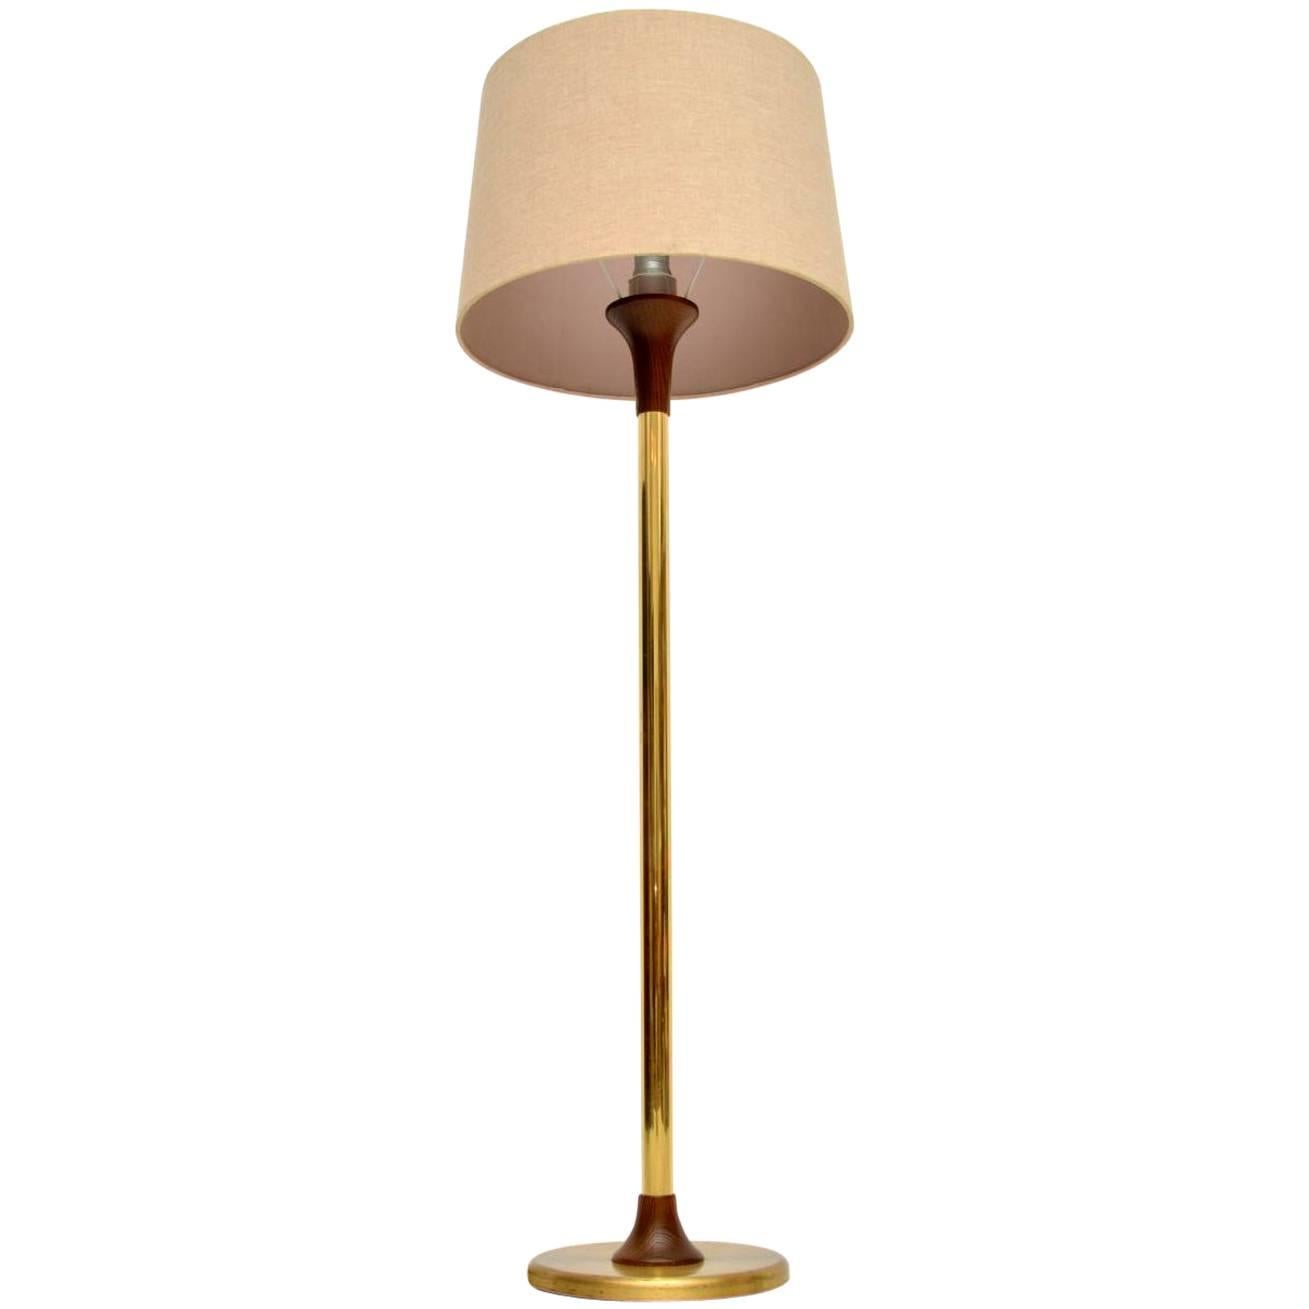 1960s Vintage Brass and Wenge Floor Lamp